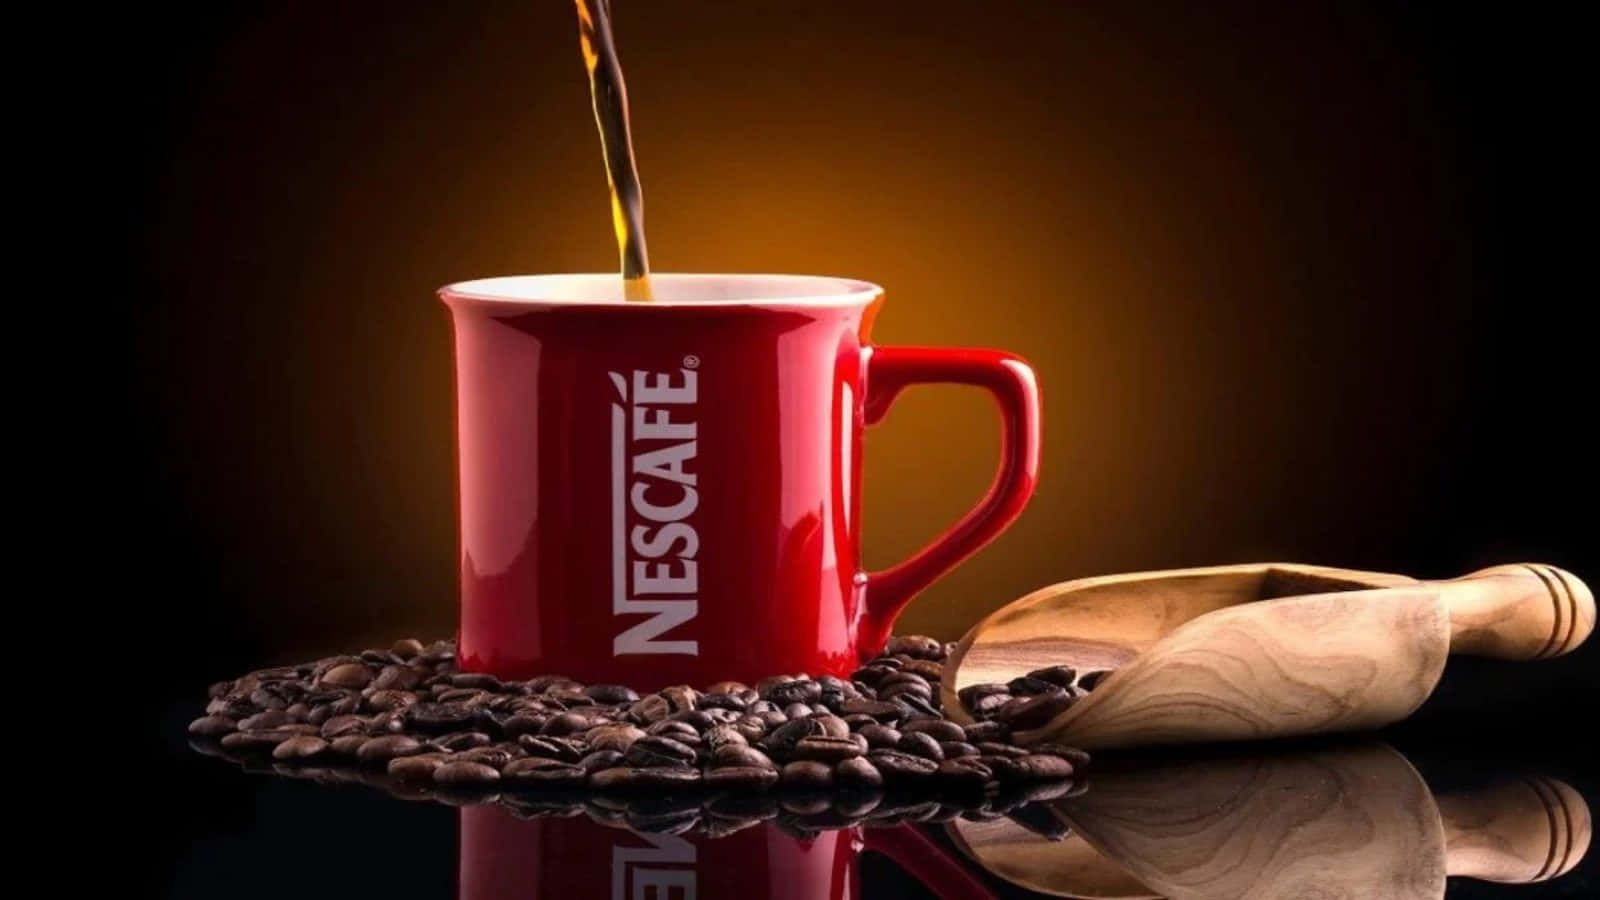 A steaming cup of brown coffee, served amidst aromatic coffee beans. Wallpaper